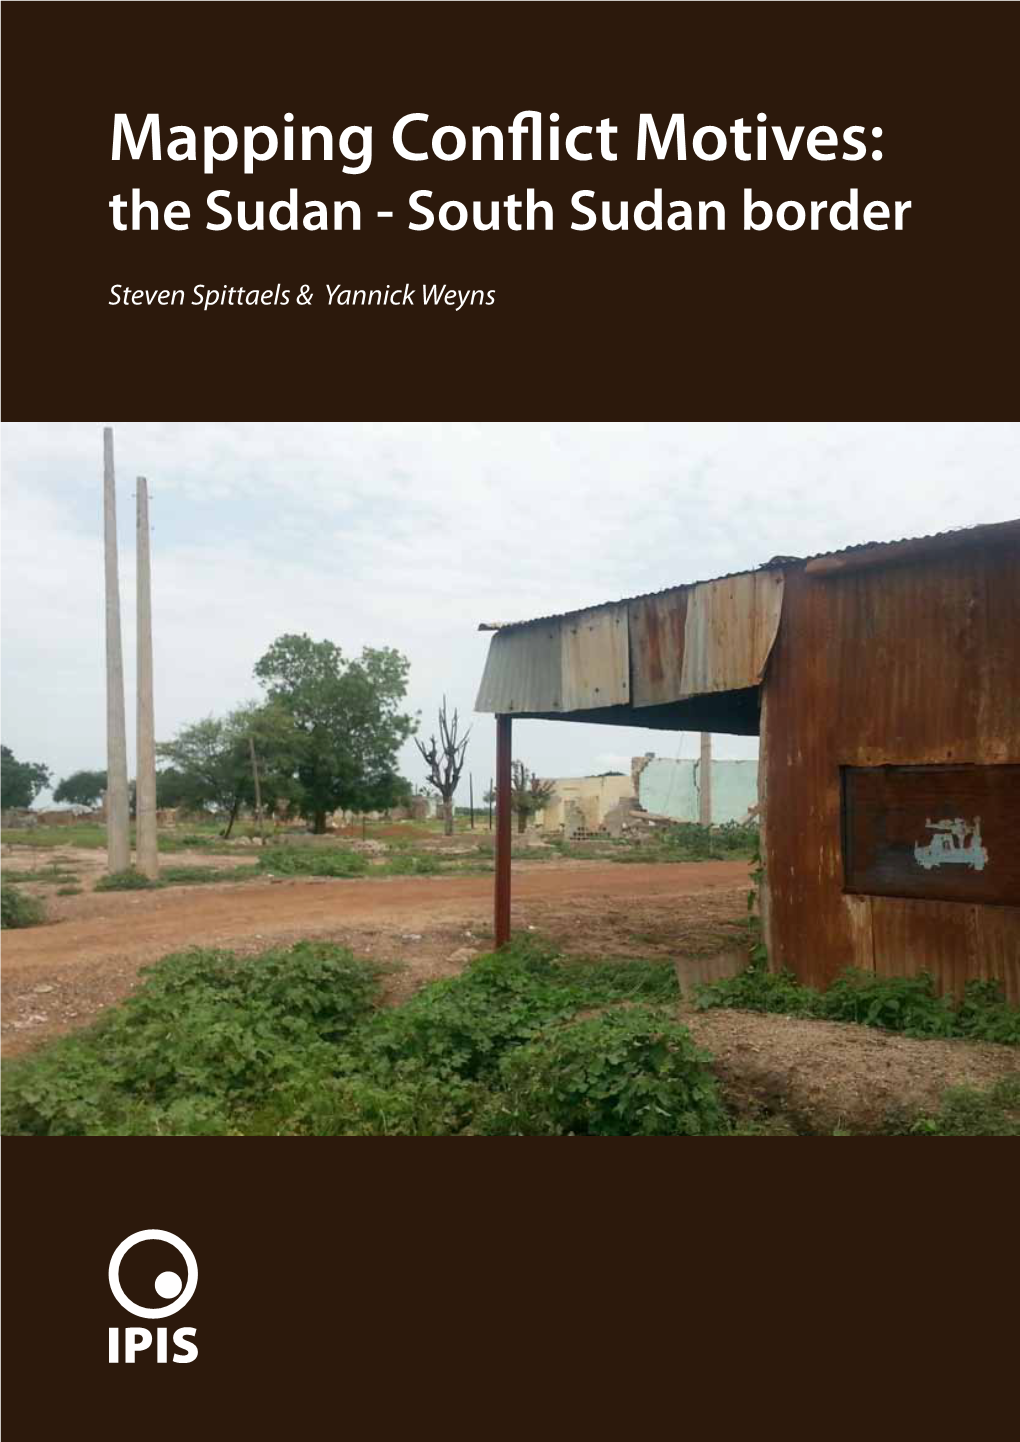 Mapping Conflict Motives: the Sudan - South Sudan Border